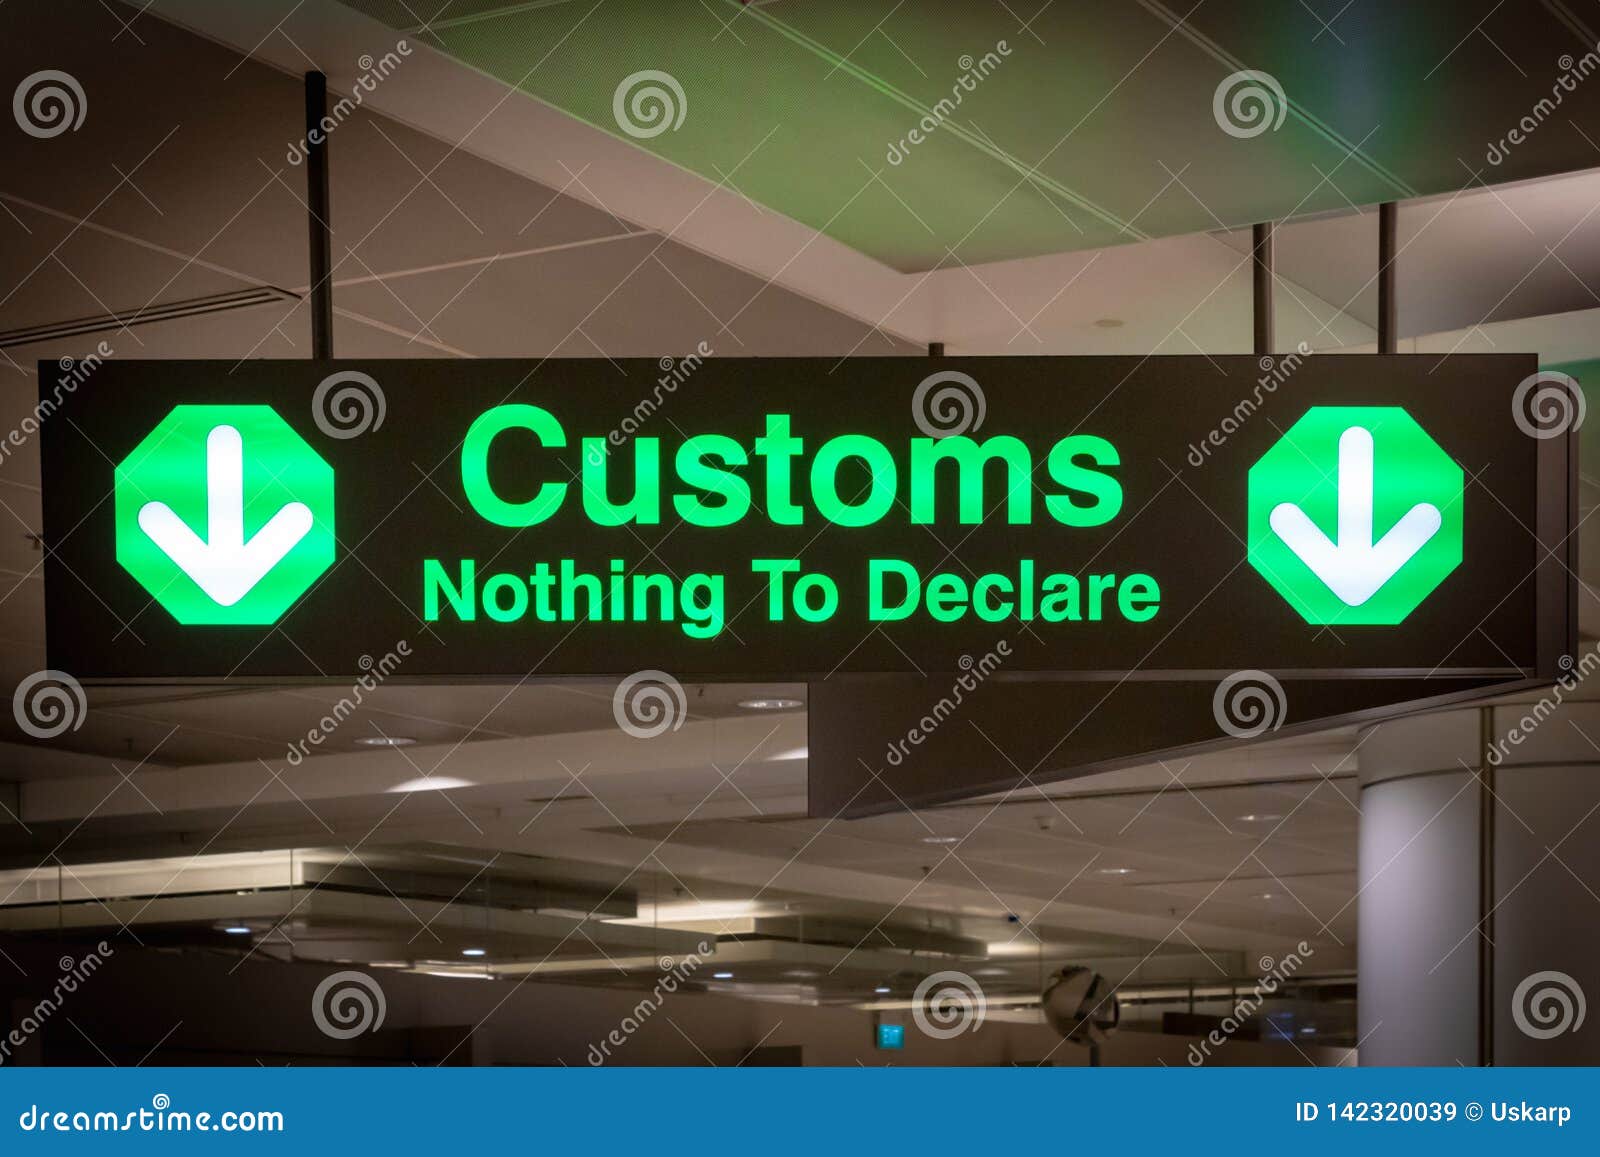 airport customs signboard icon in international airport